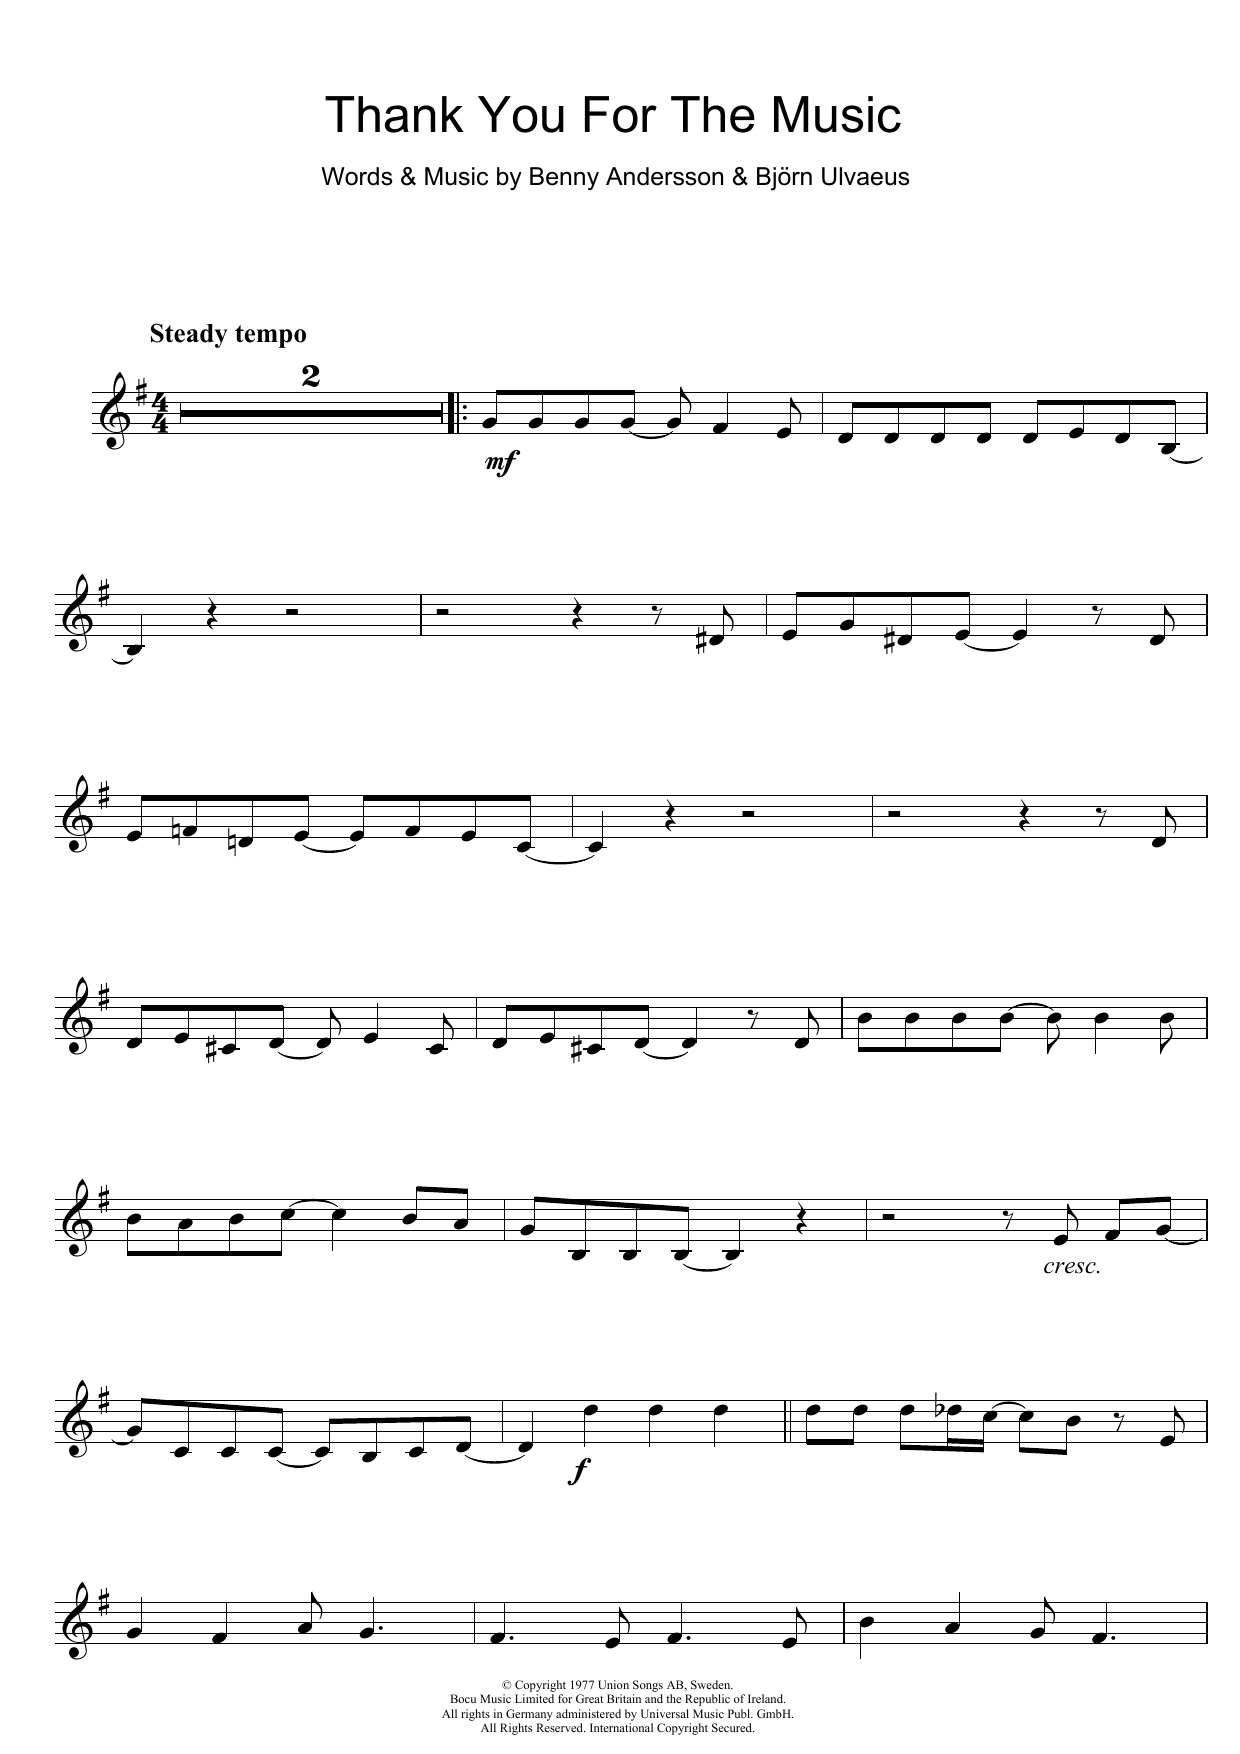 Download ABBA Thank You For The Music Sheet Music